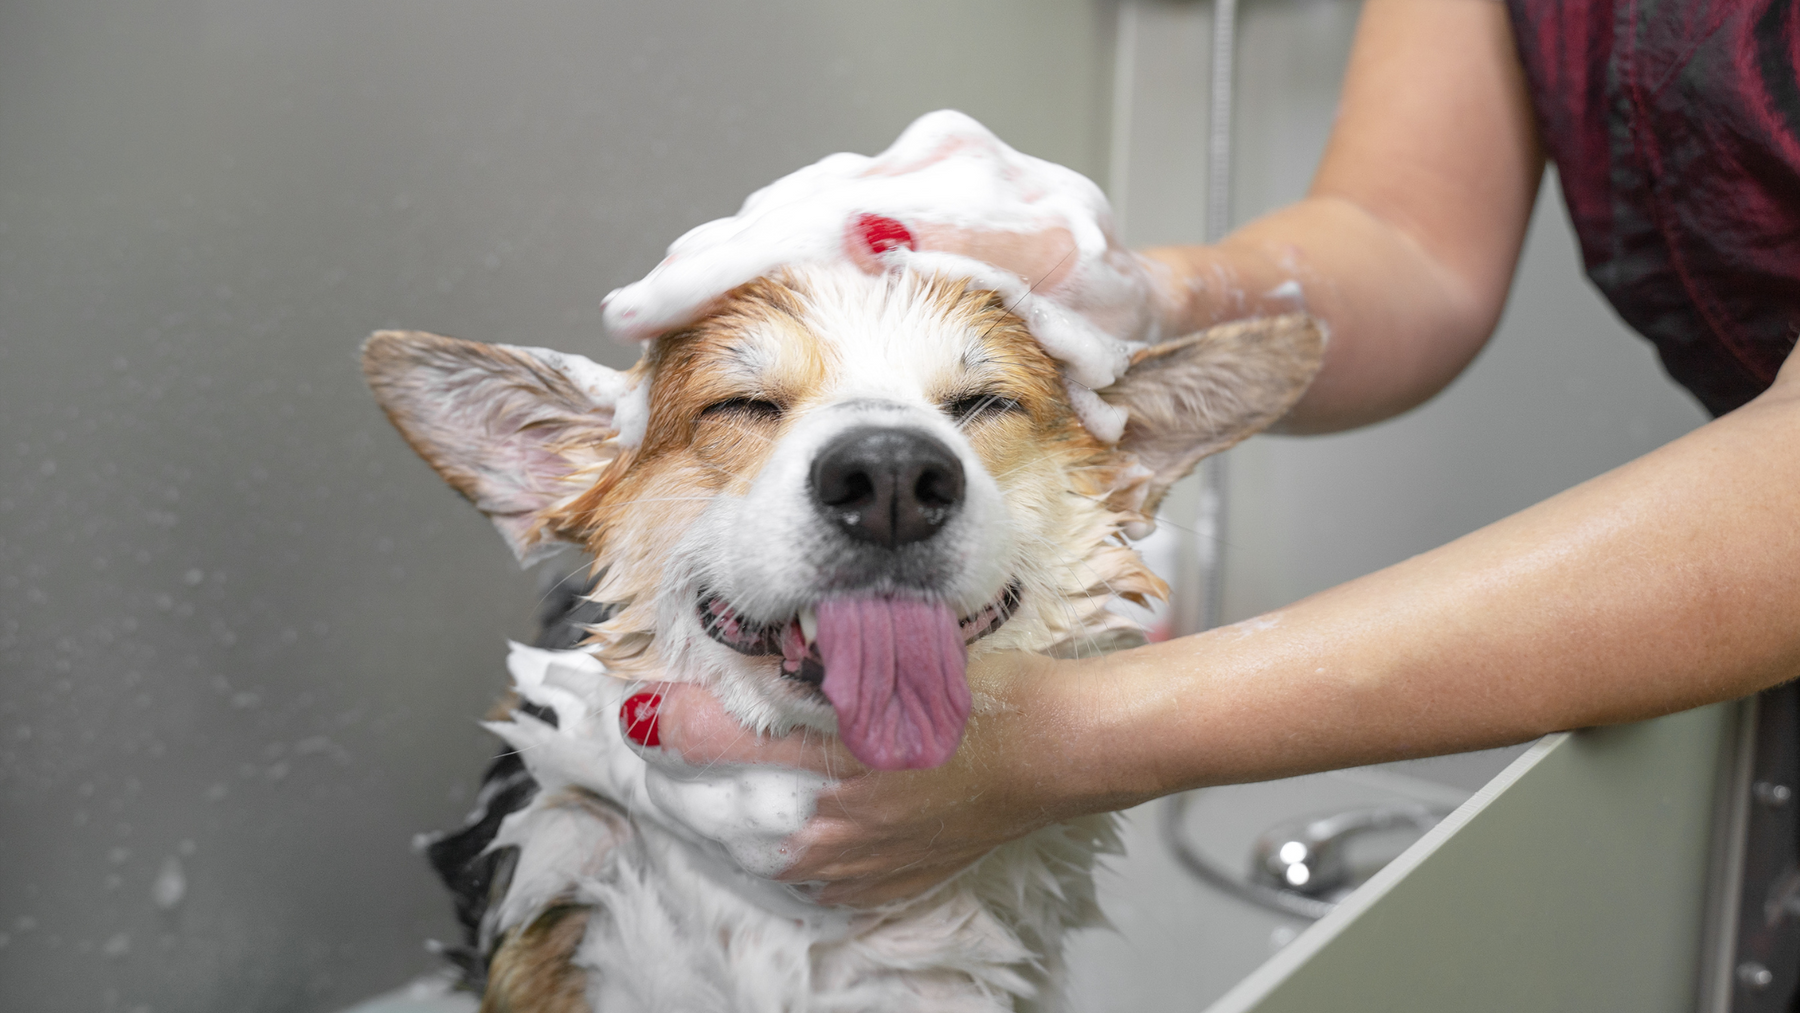 Ultimate Puppy Grooming Guide: Essential Tips for First-Time Dog Owners